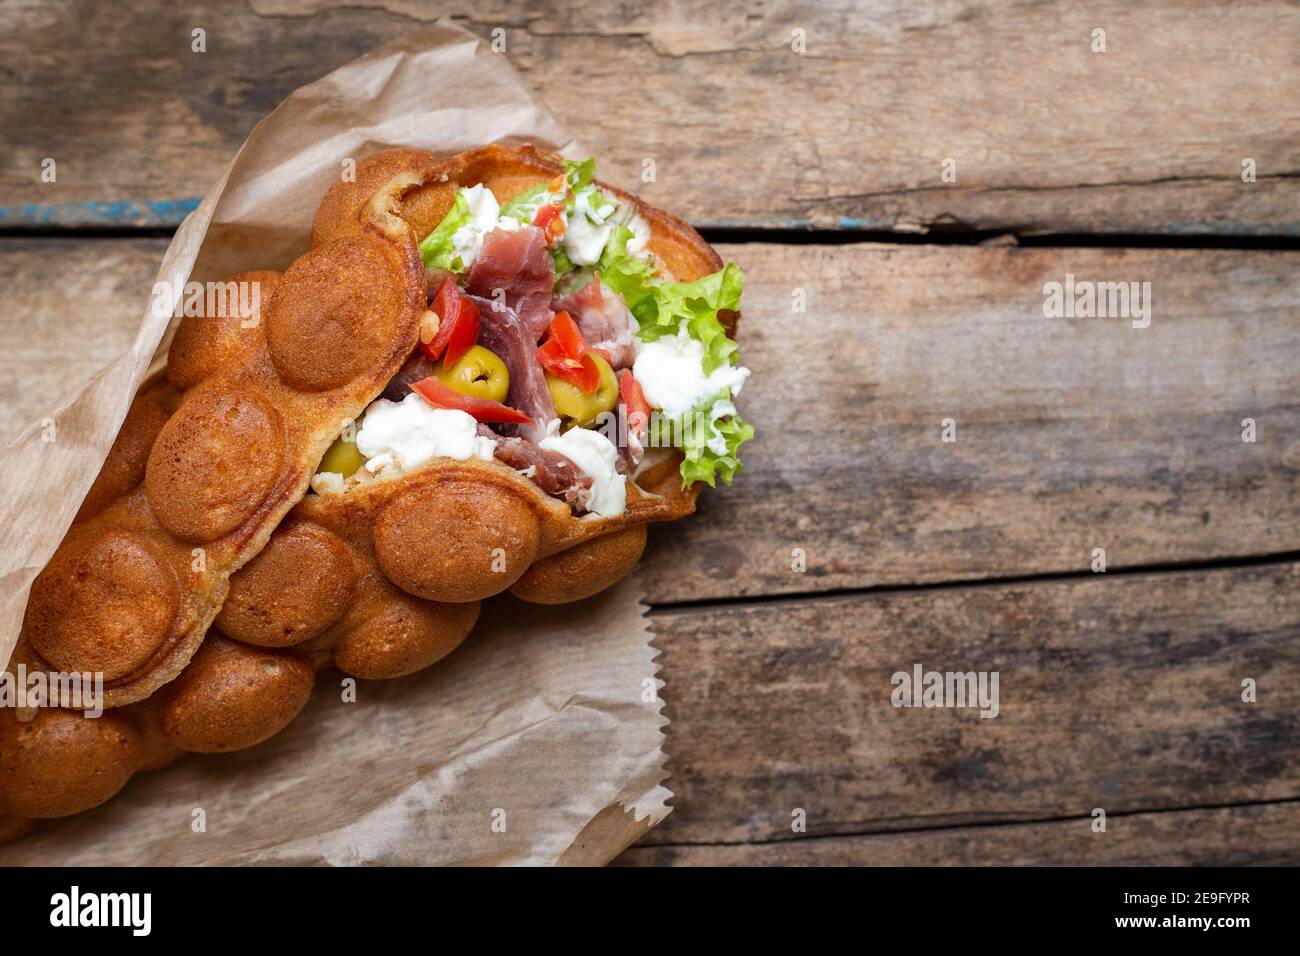 Top view of waffle stuffed with meat and olives Stock Photo